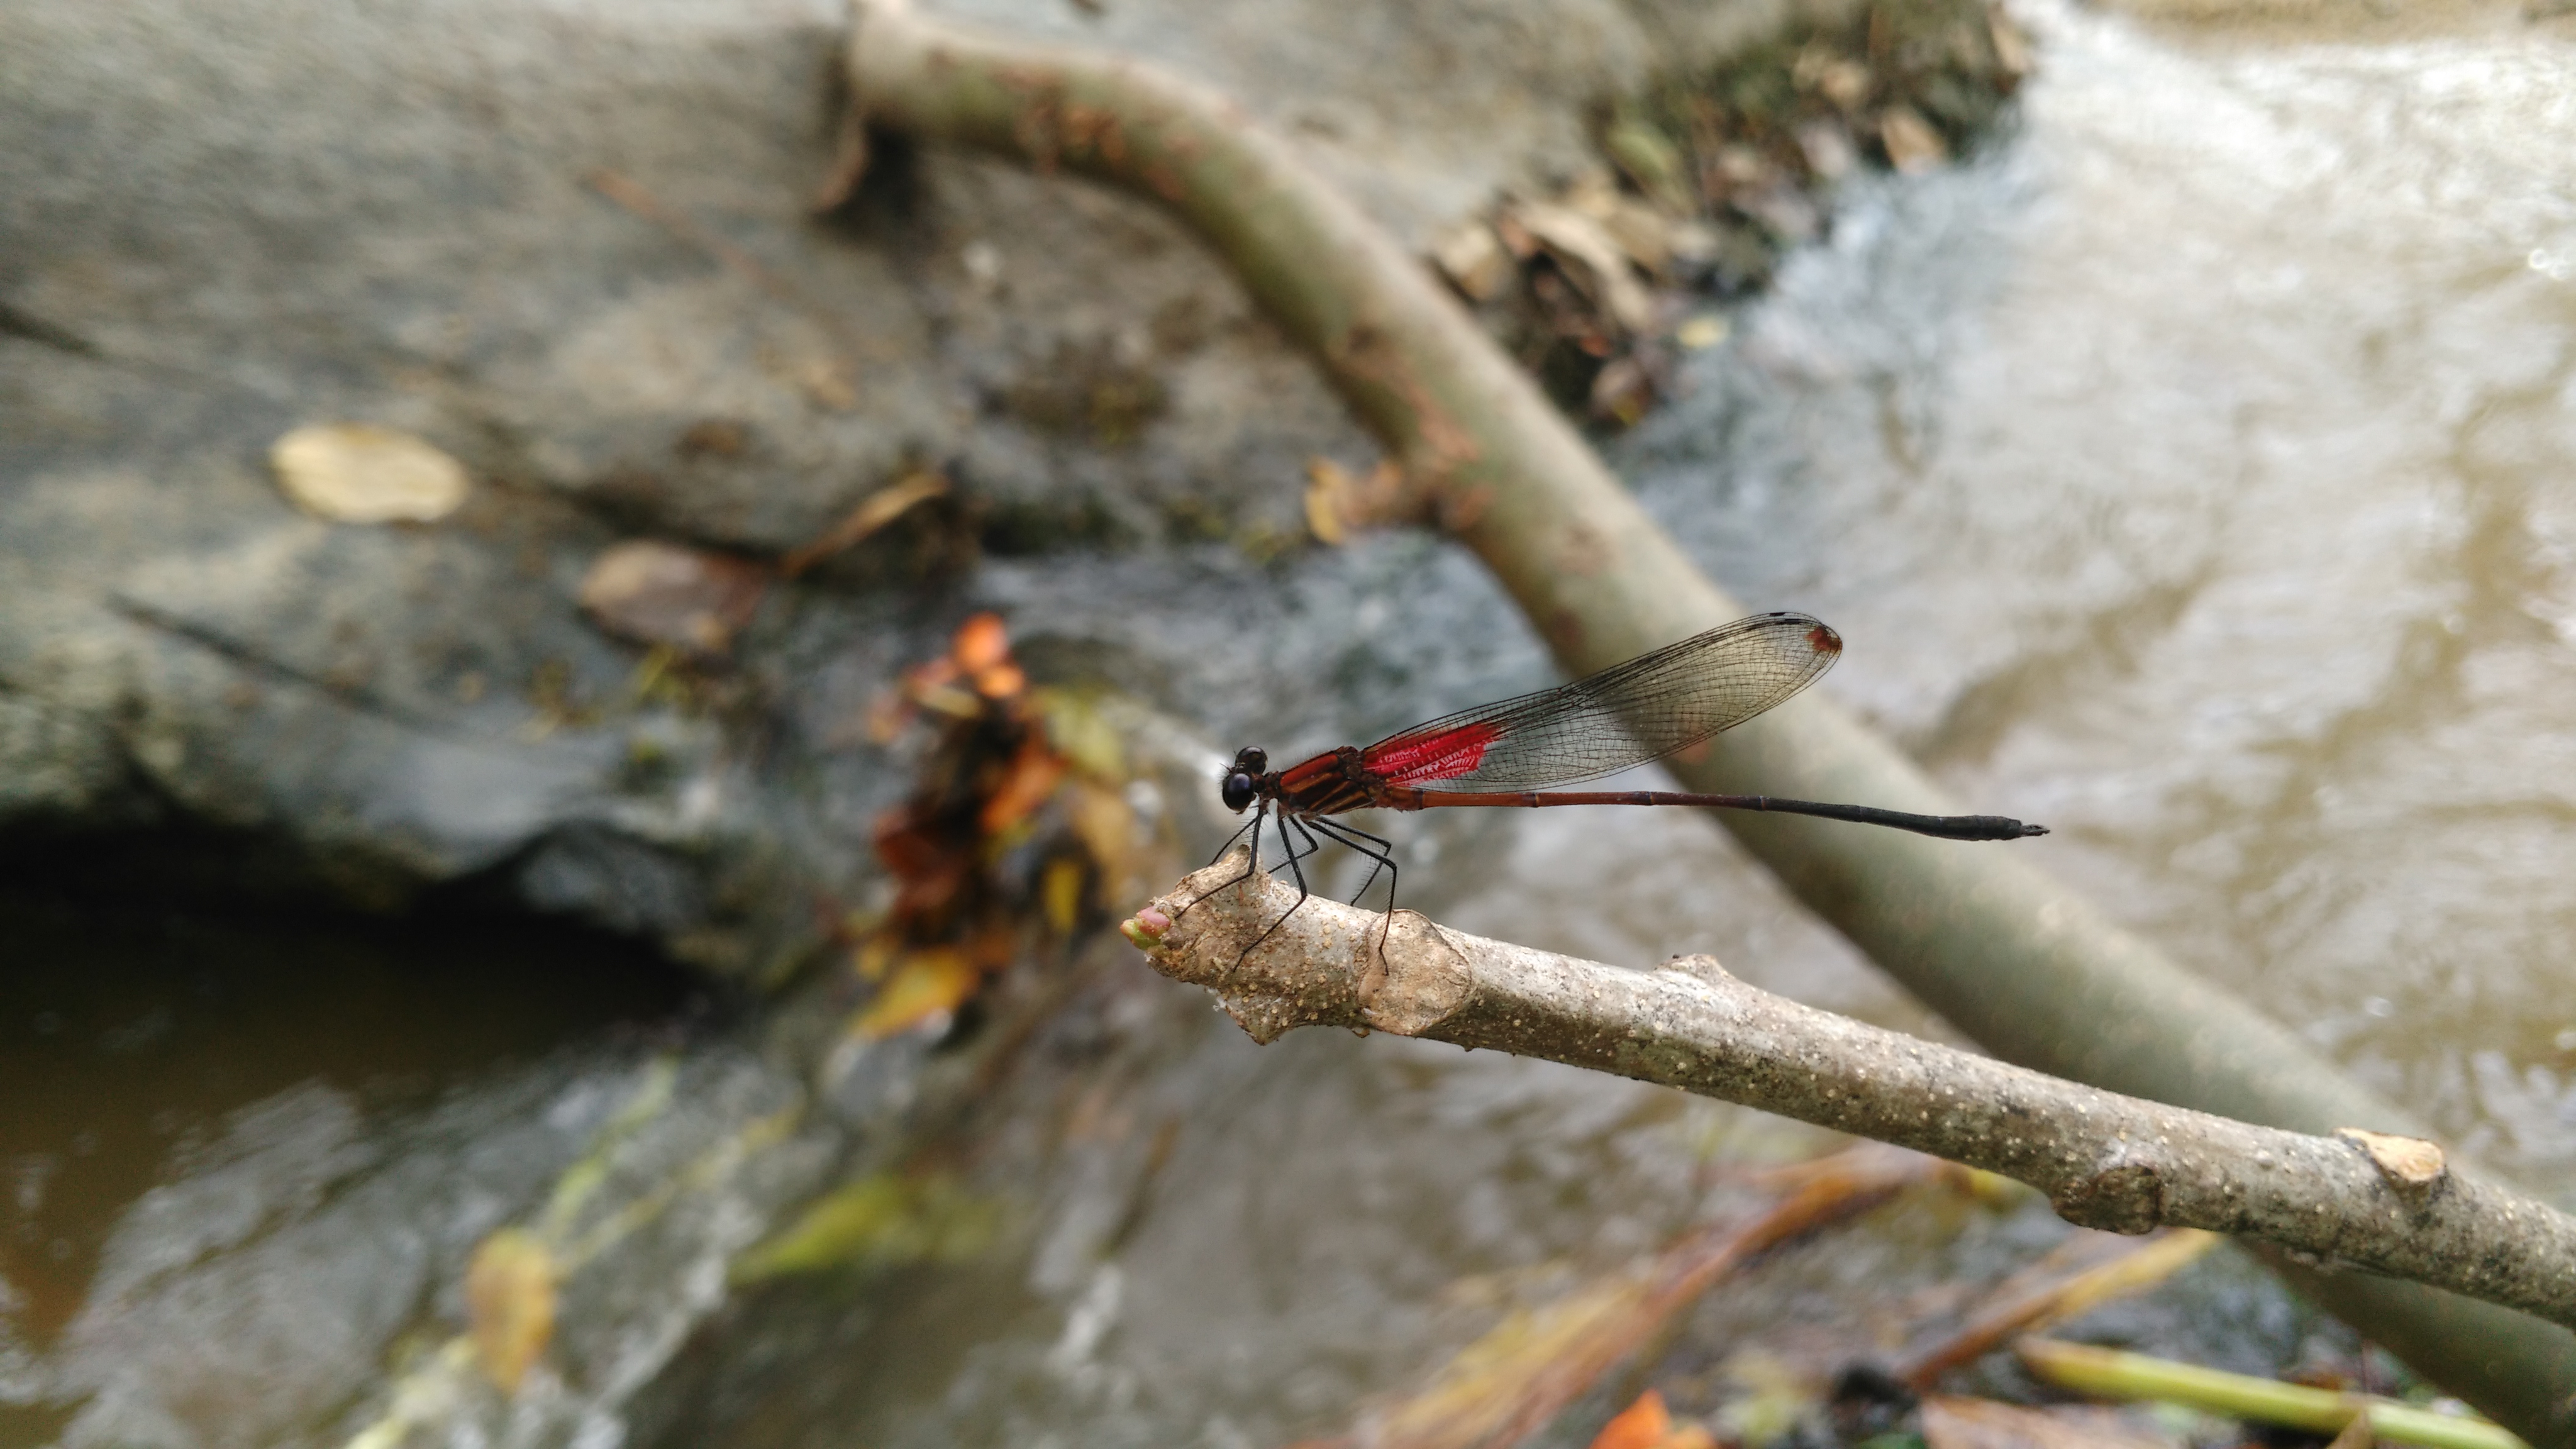 Dragonflies River Landscape Insect Red Flowers Without People 4096x2304